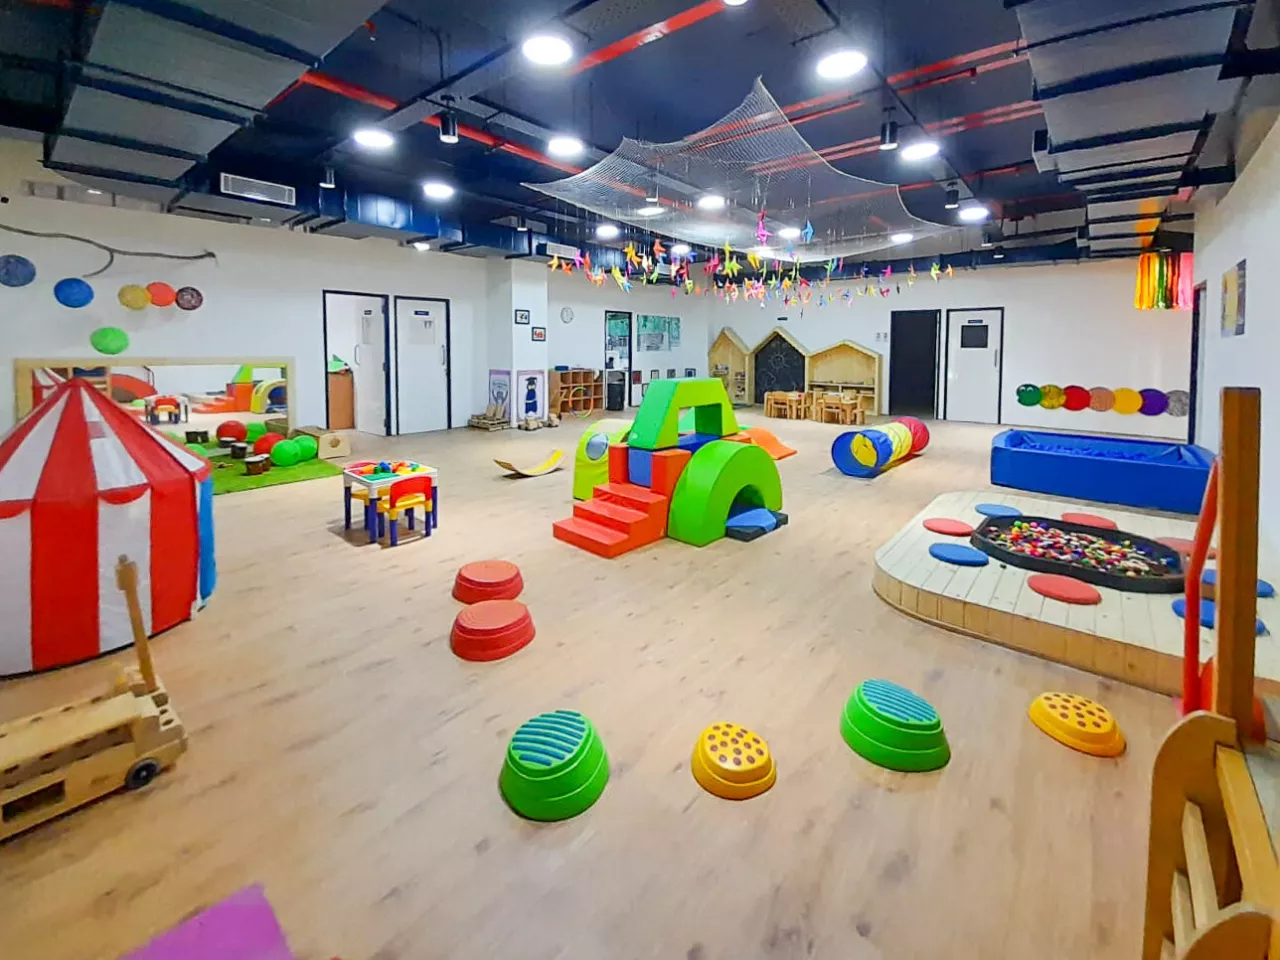 Kido International Preschool and Daycare: Bridging the Gap in India's Childcare Industry